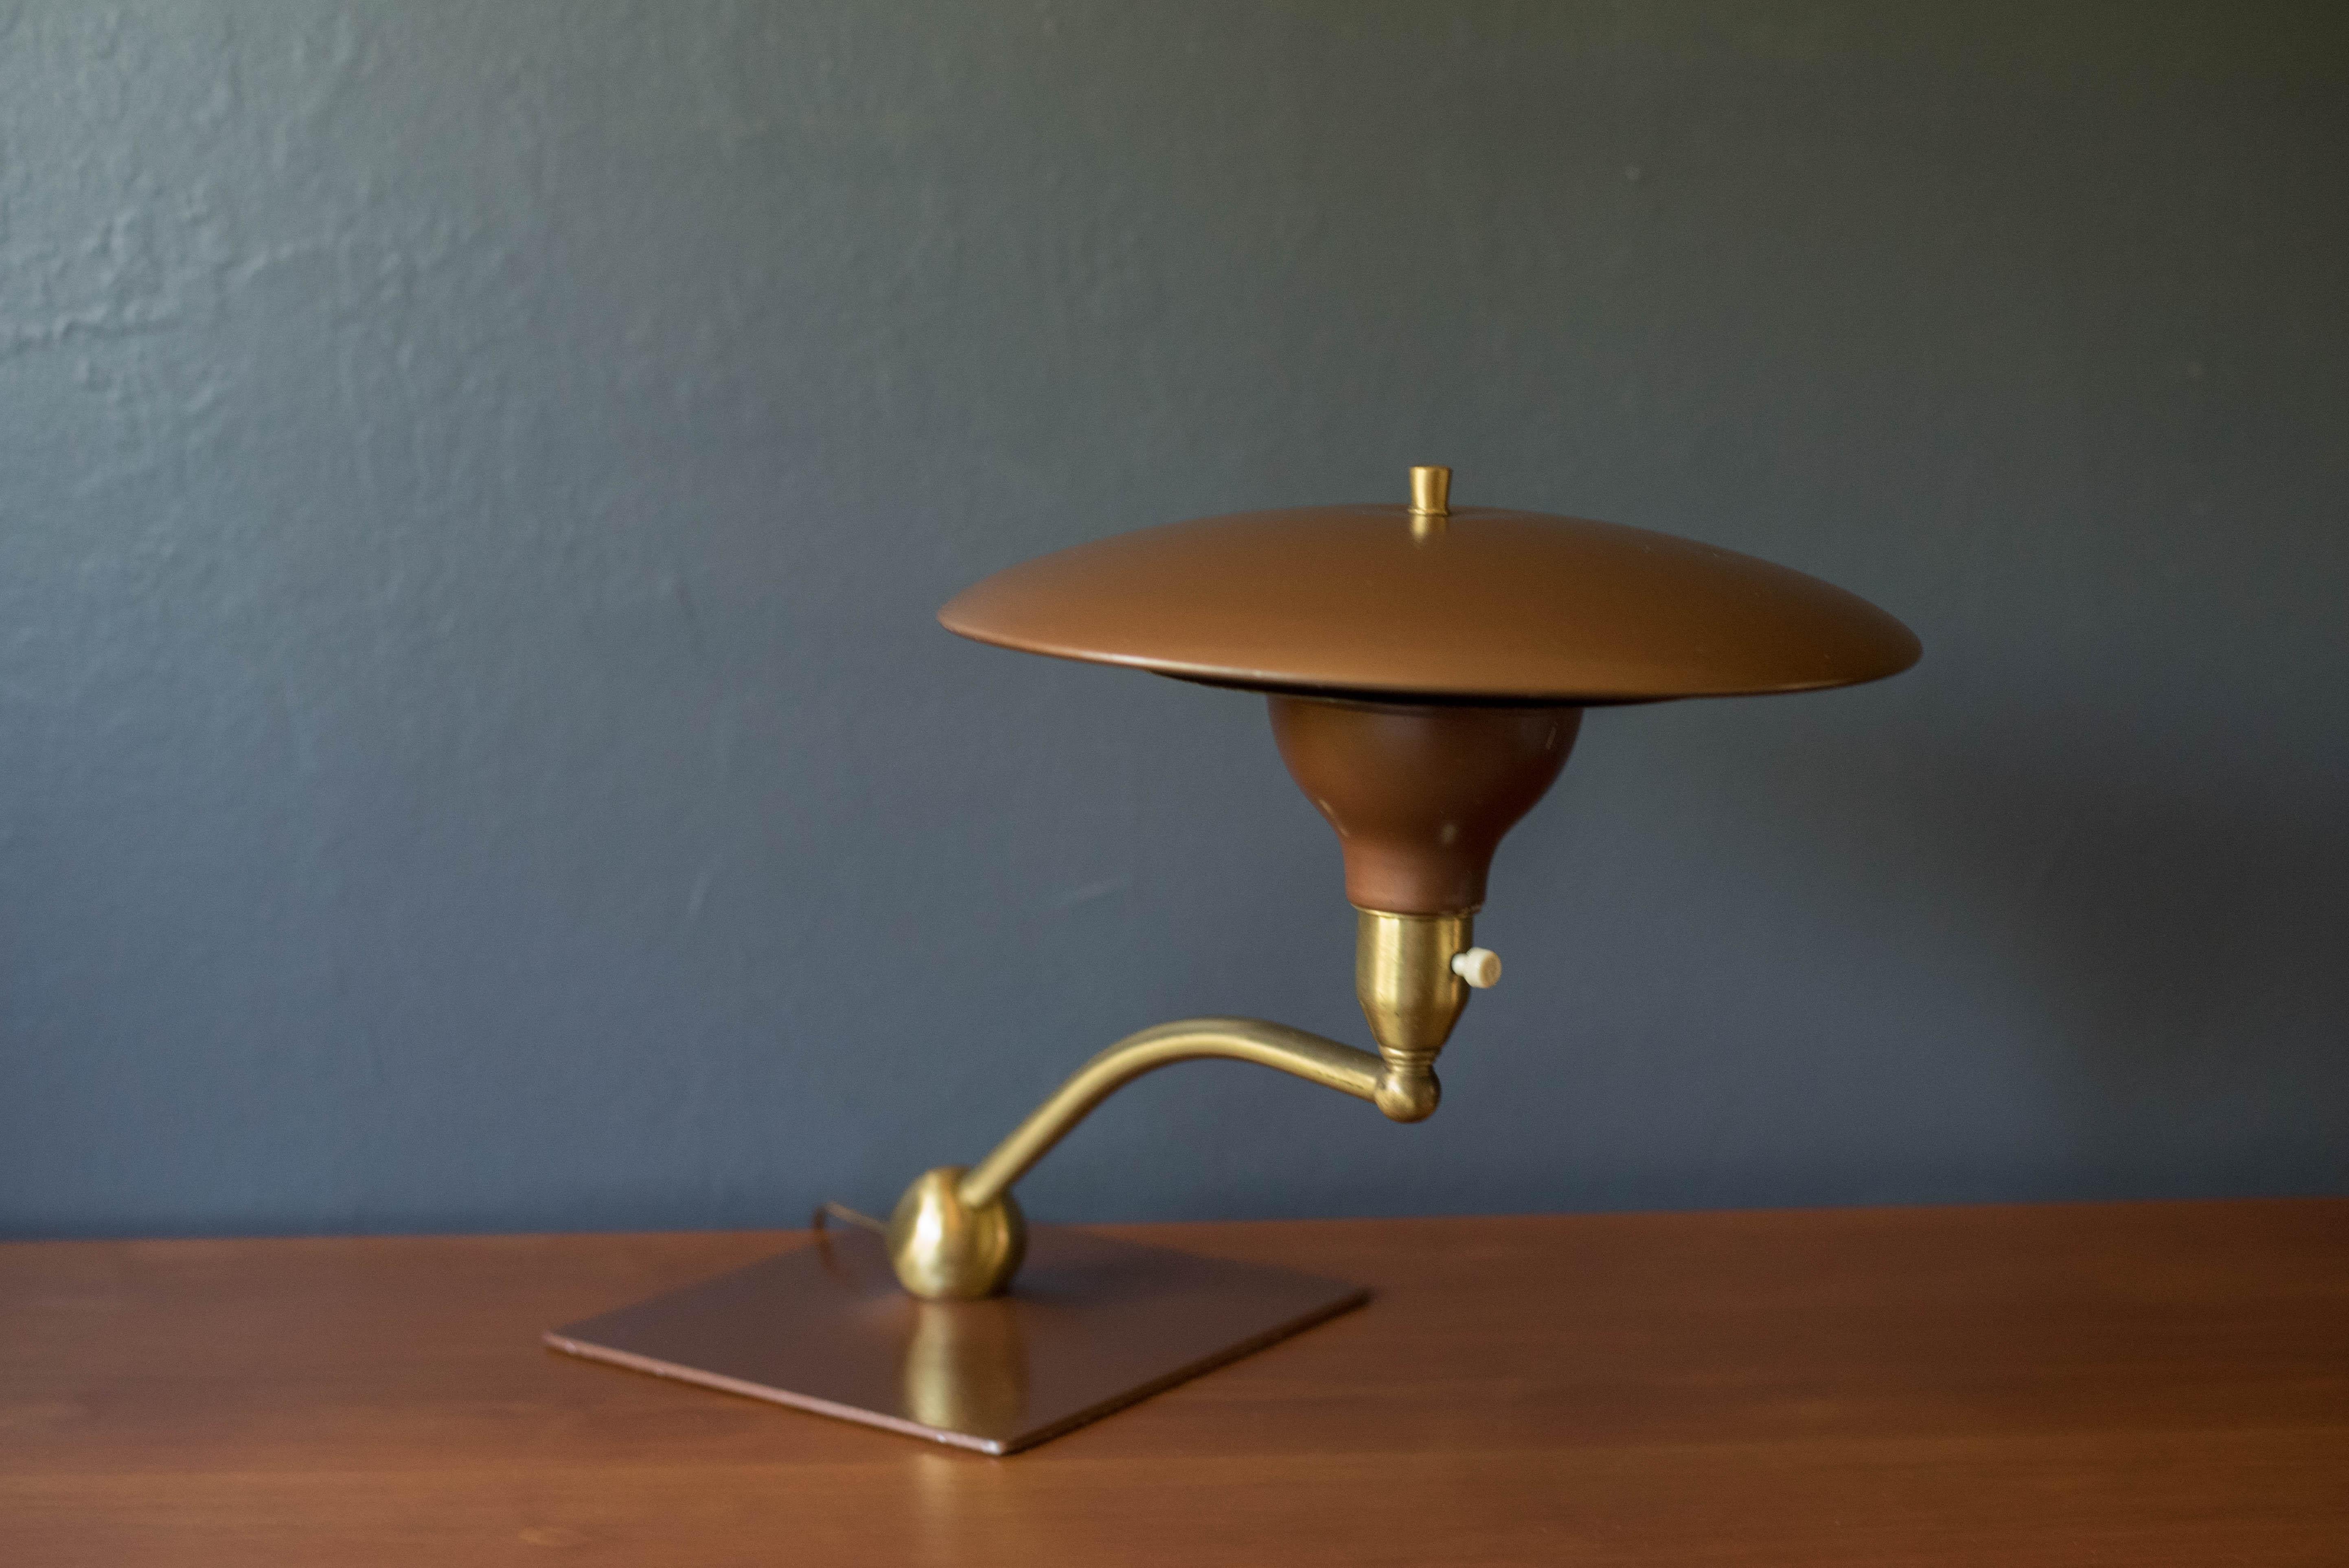 Vintage sight light desk lamp manufactured by M.G. Wheeler Company, circa 1960's. Features a rotating swivel arm and supporting weighted brass base. Perfect to use as an office desk lamp or reading light. This unique piece pairs well with art deco